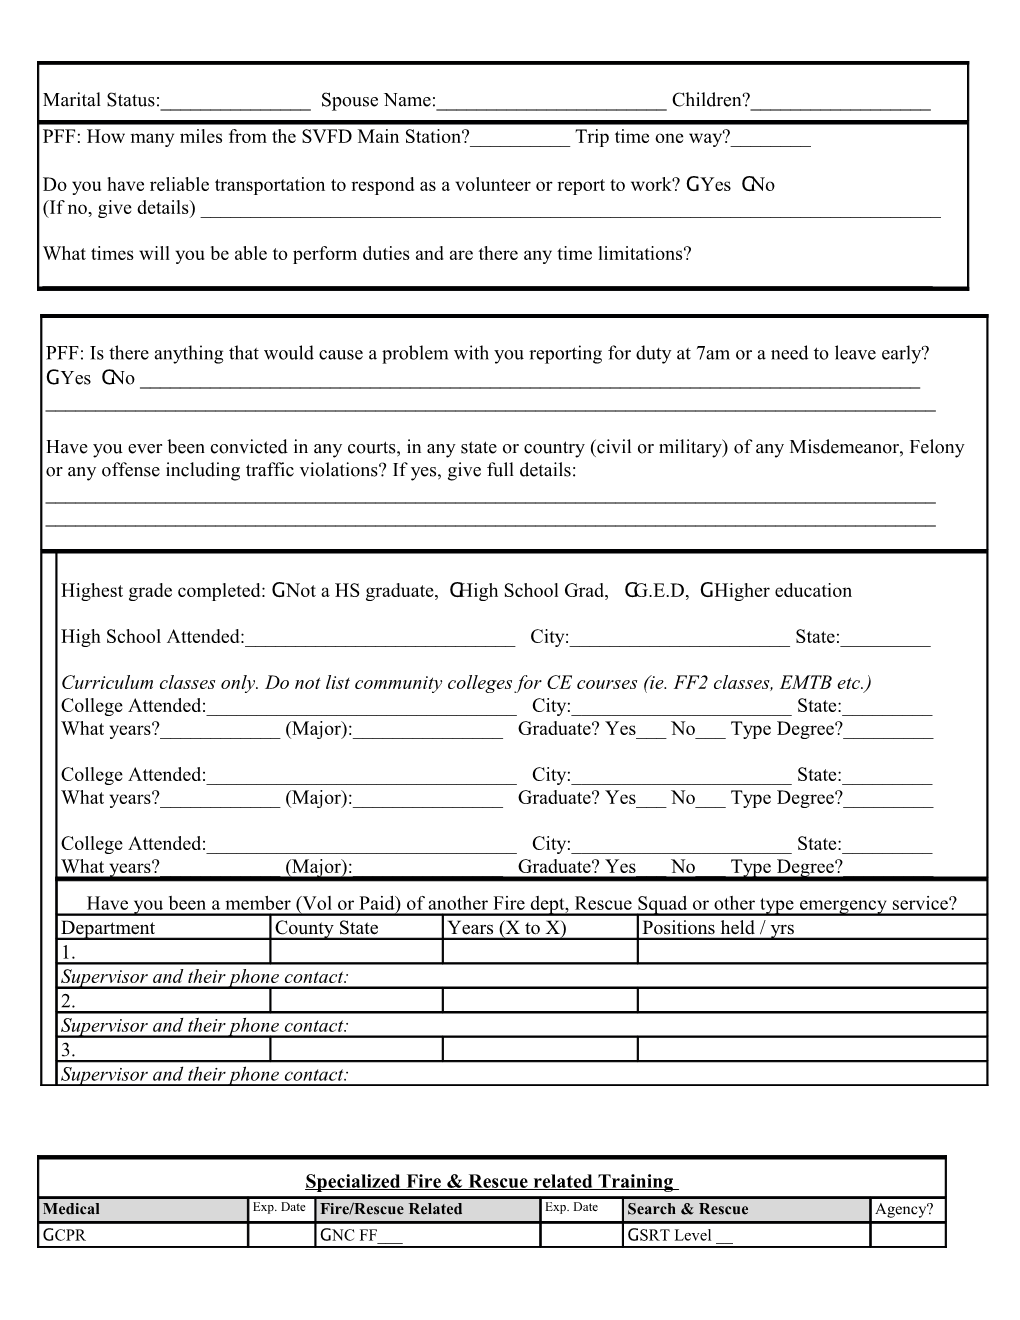 Application for The s5